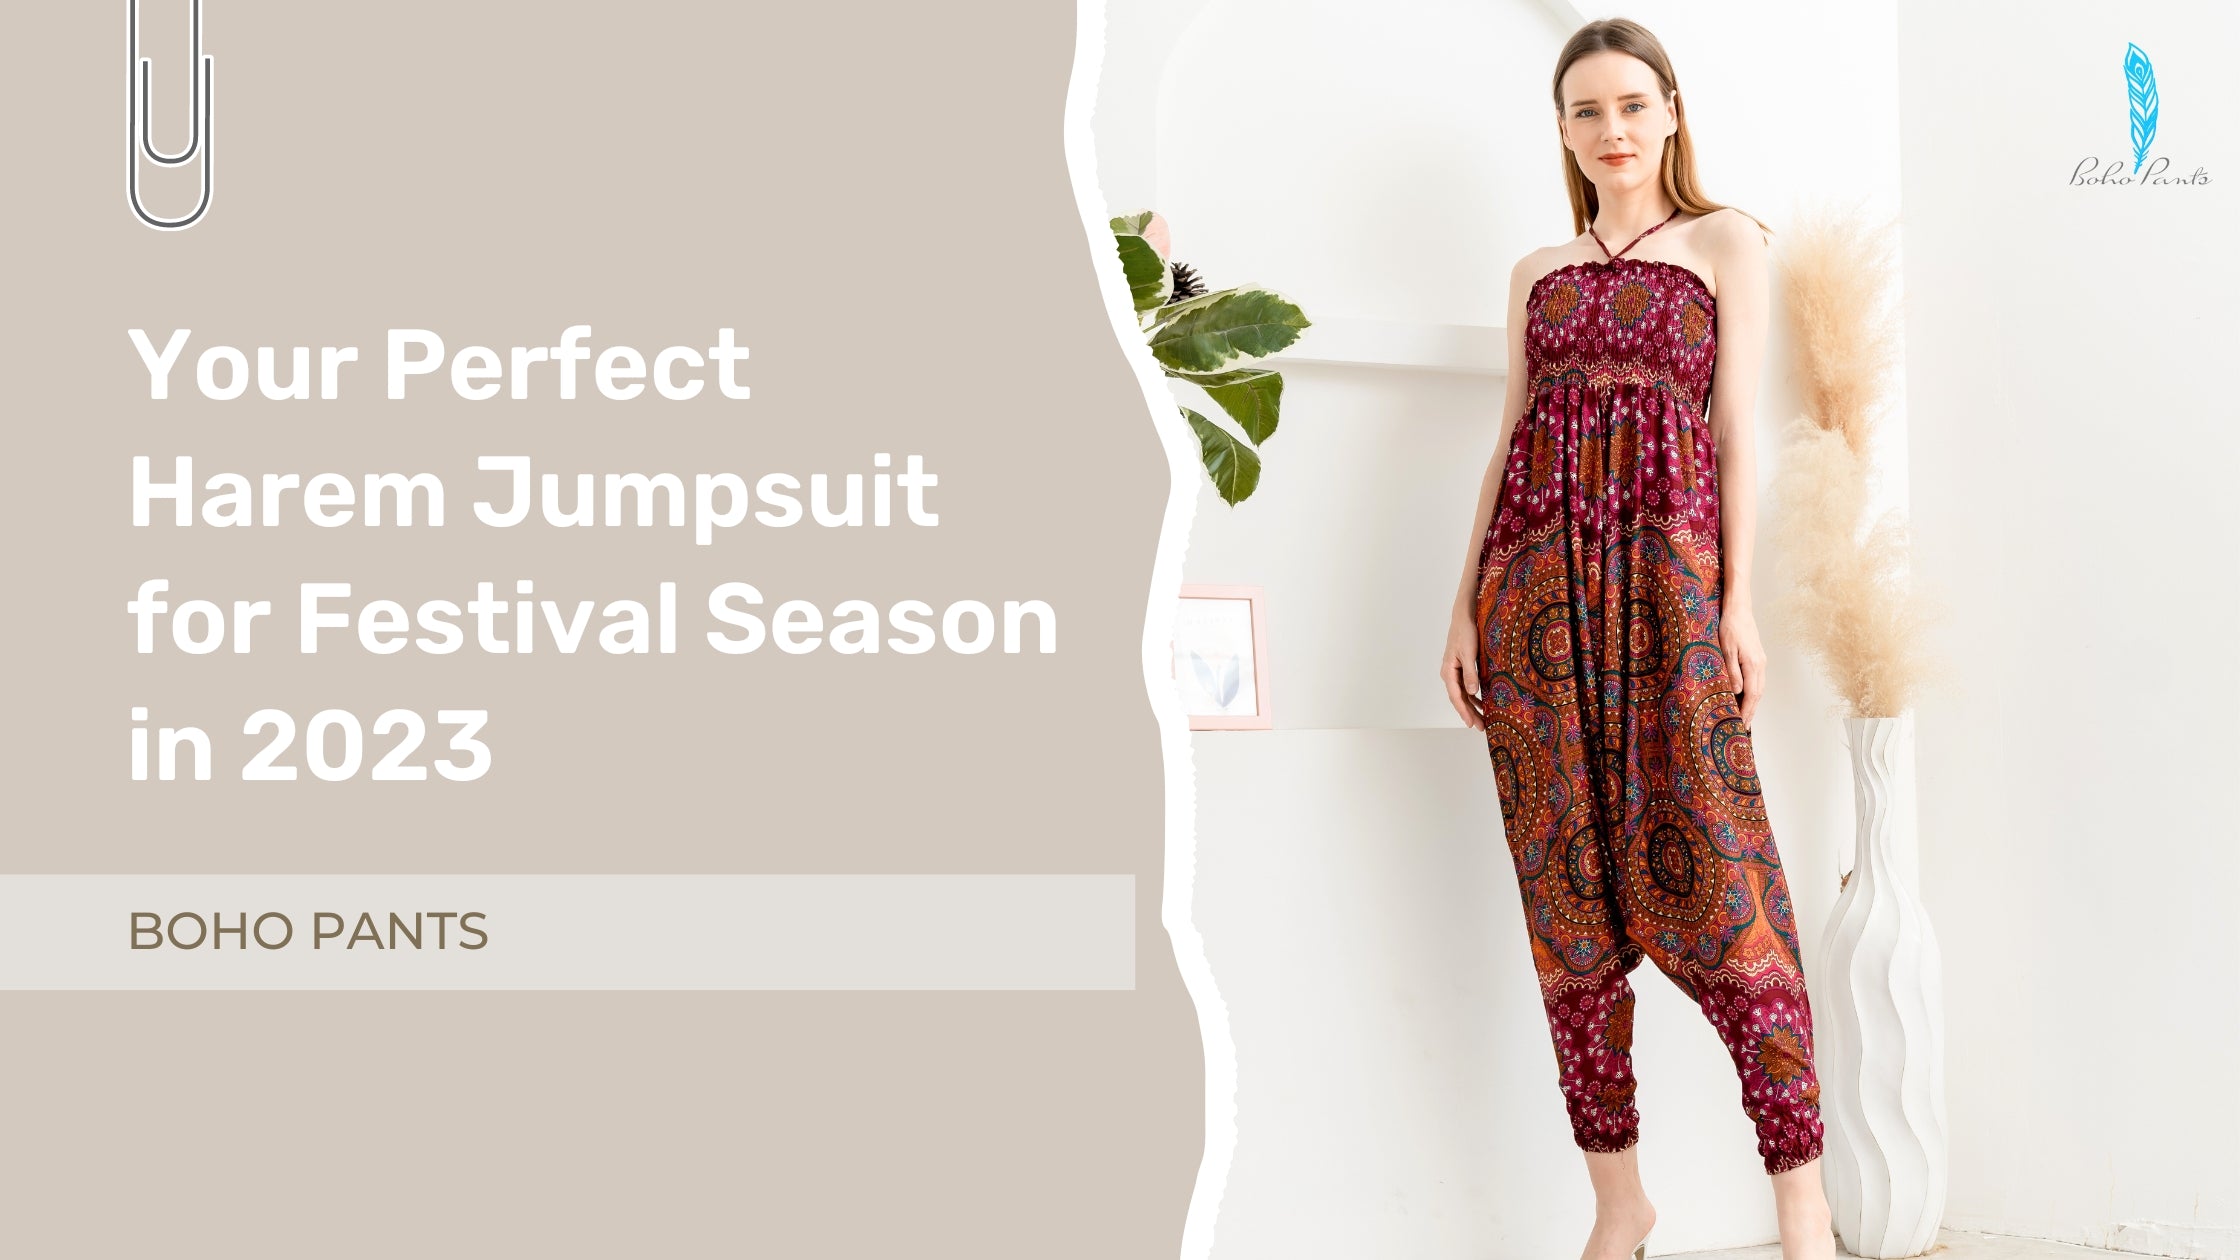 Your Perfect Harem Jumpsuit for Festival Season in 2023 by Boho Pants